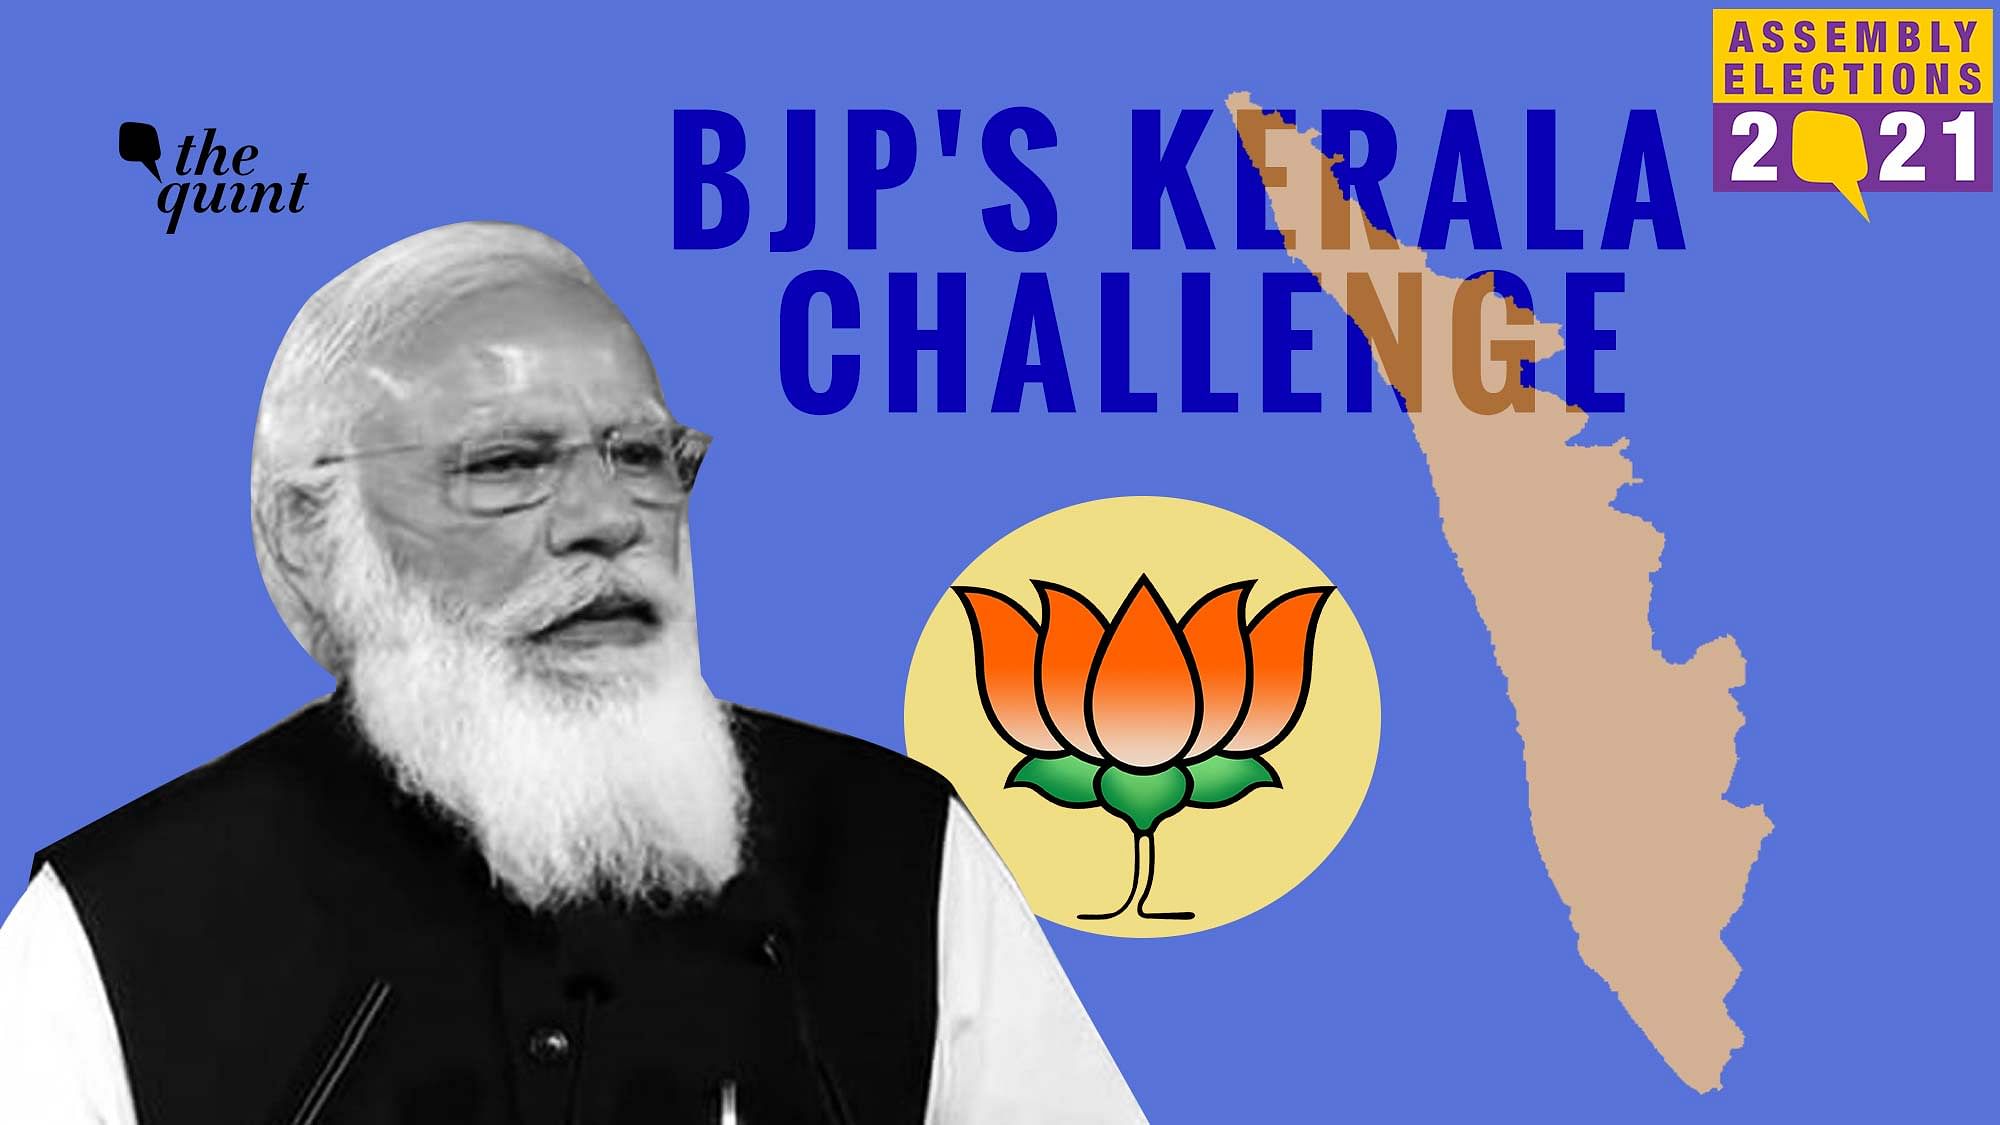 The BJP is making headway in Kerala this Assembly election